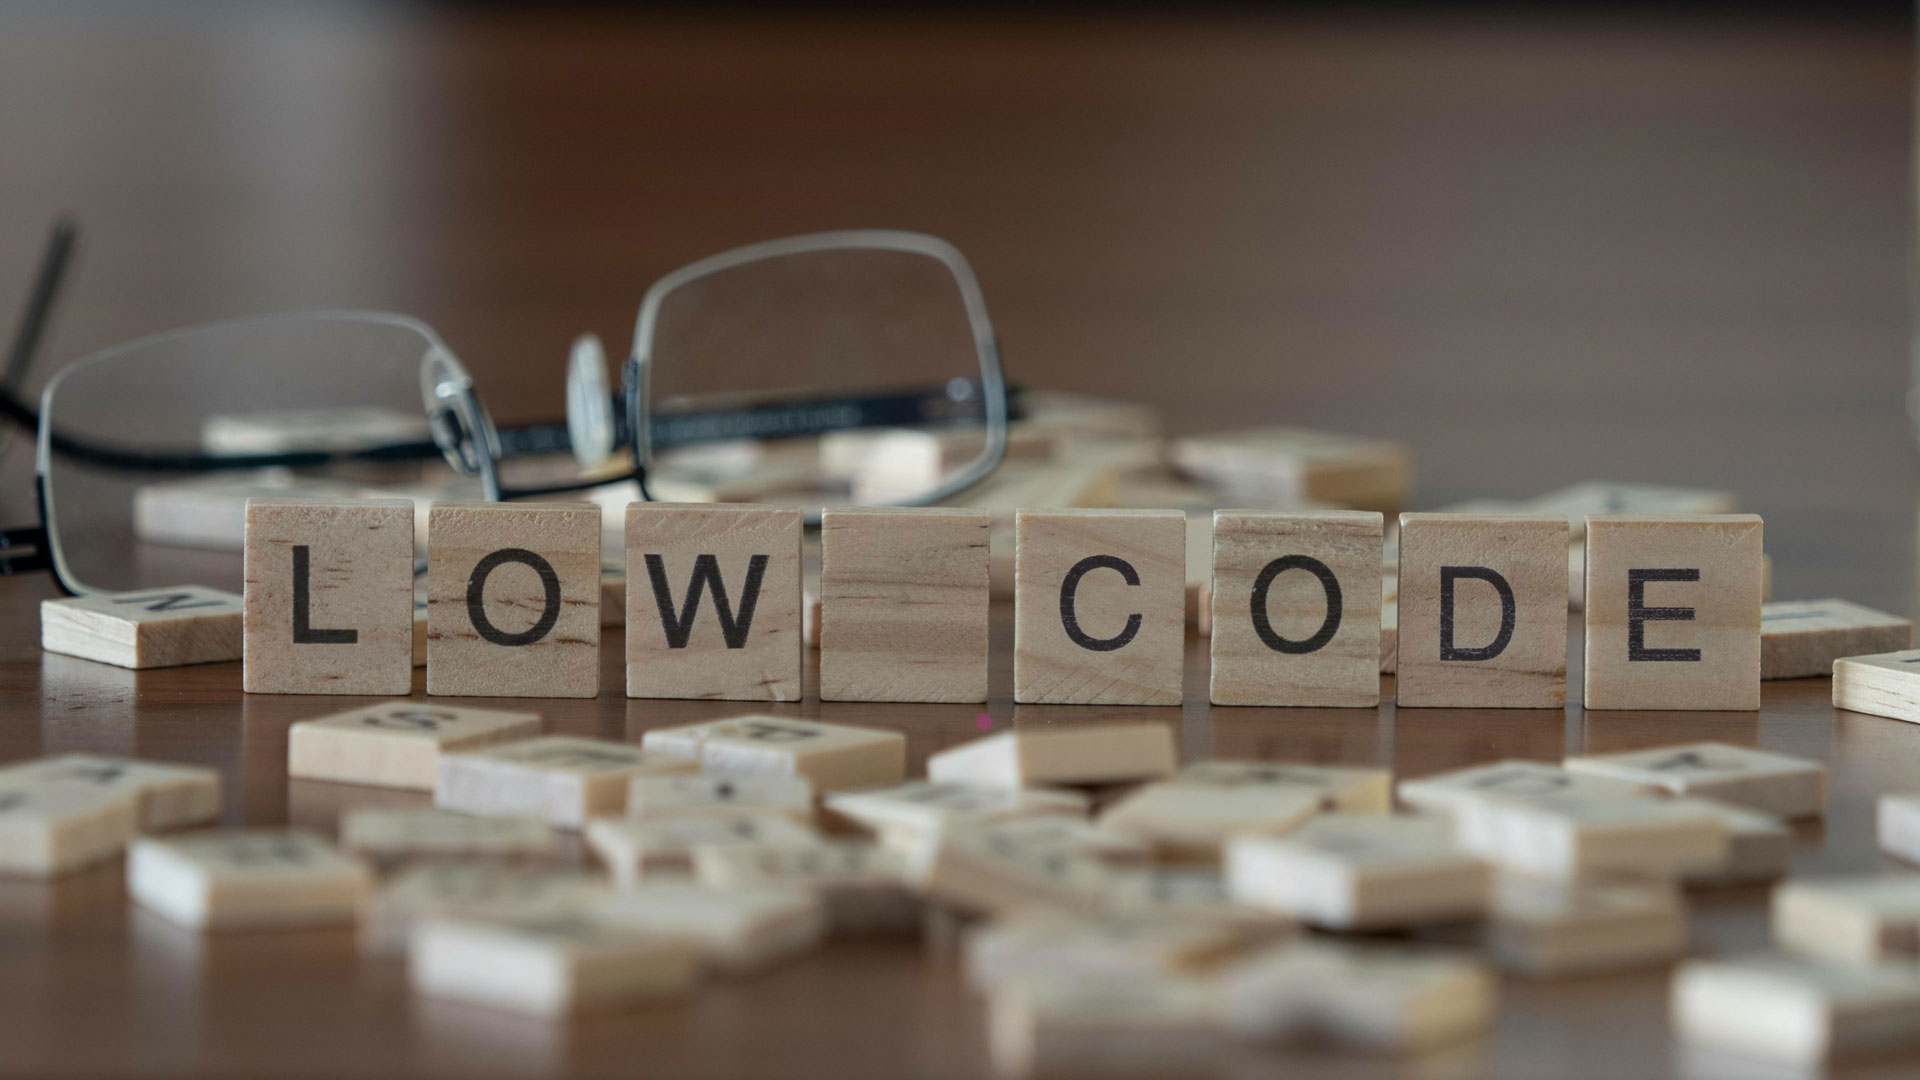 low code concept represented by wooden letter tiles